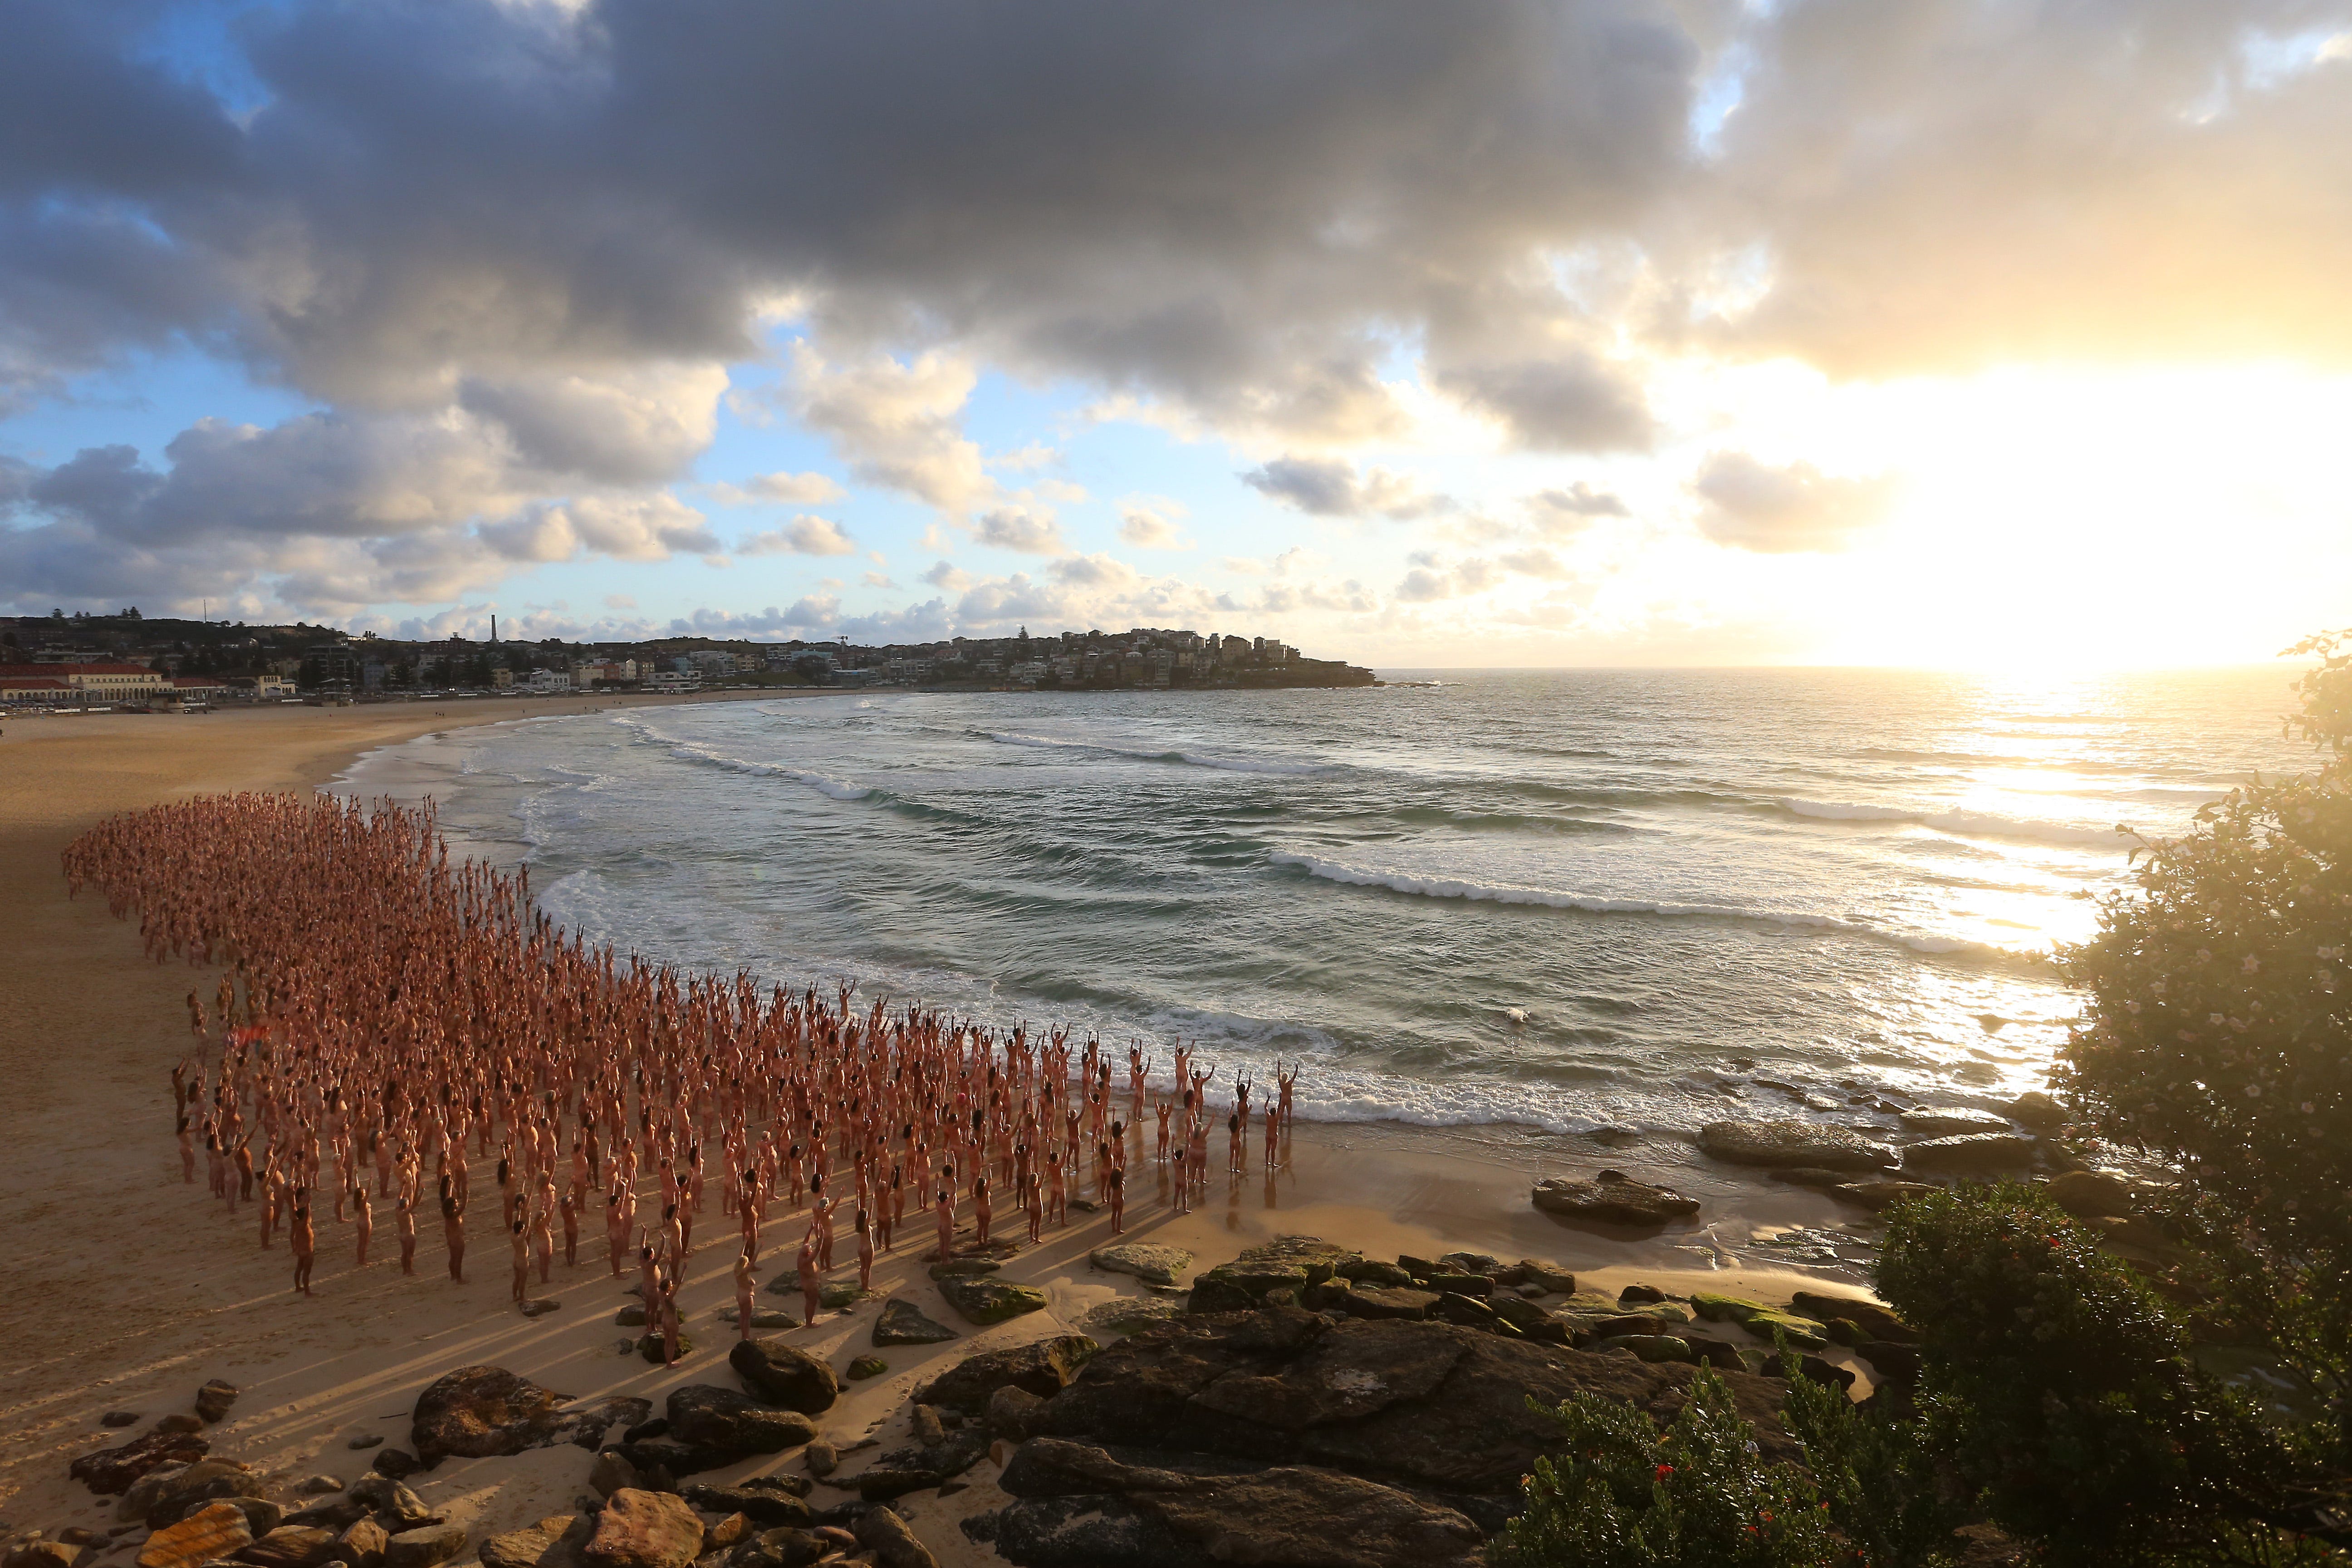 5184px x 3456px - Thousands pose nude at Australian beach in Spencer Tunick photo shoot